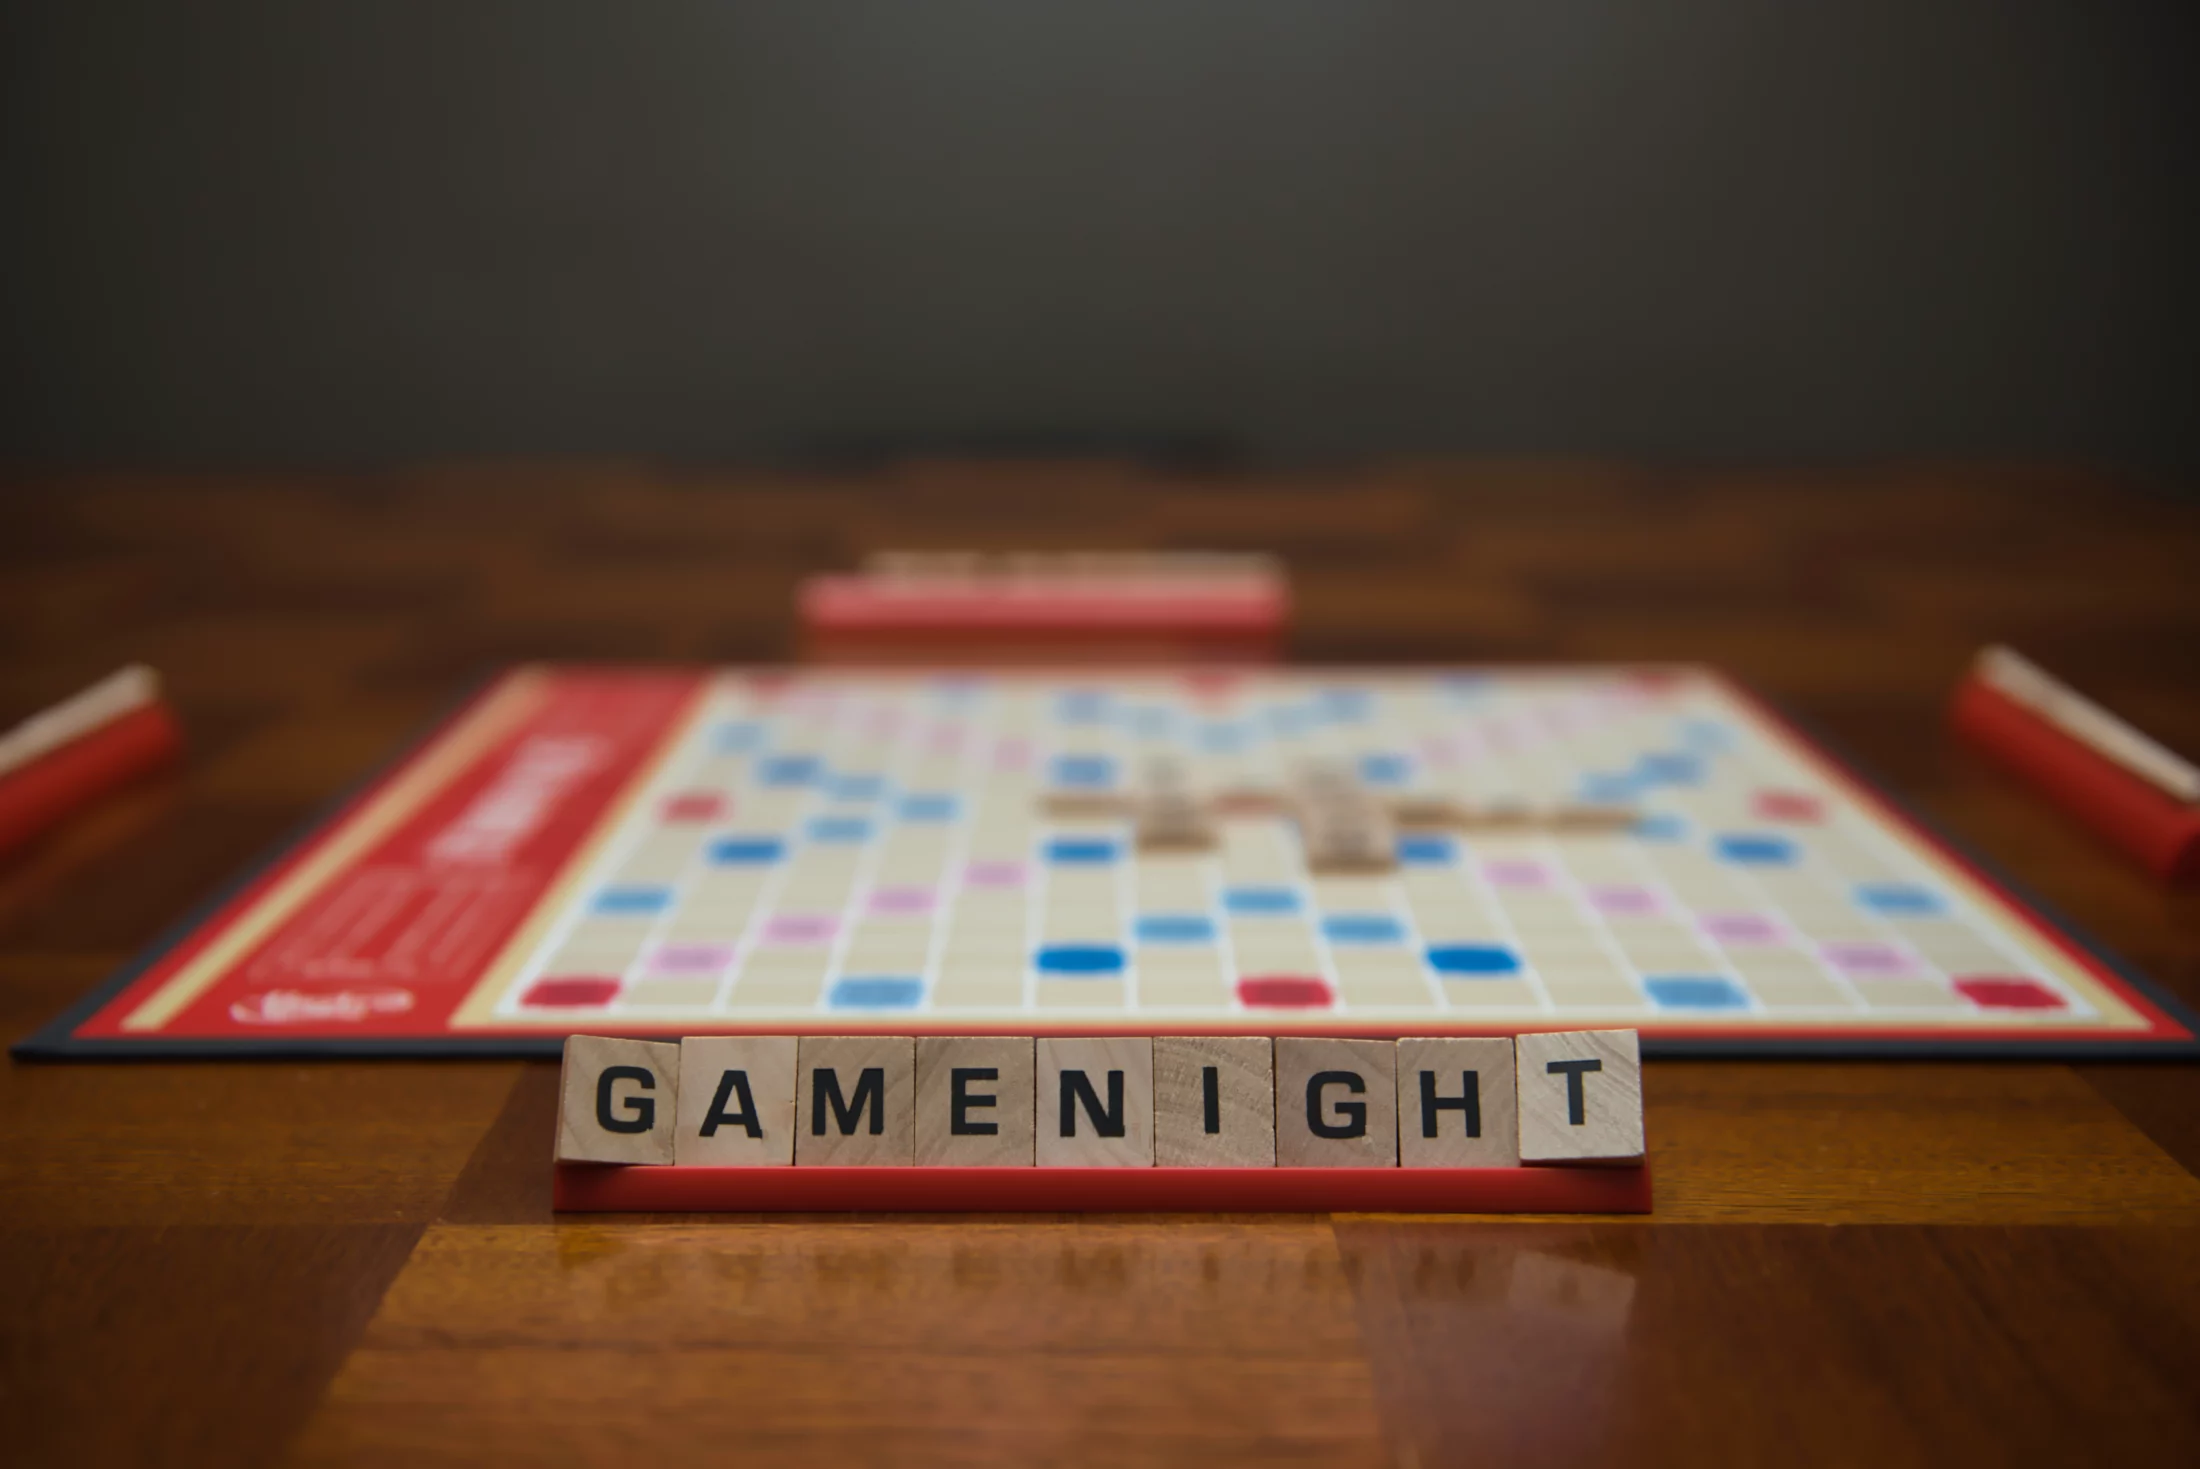 no spend weekend ideas: play a board game | Swoosh Finance